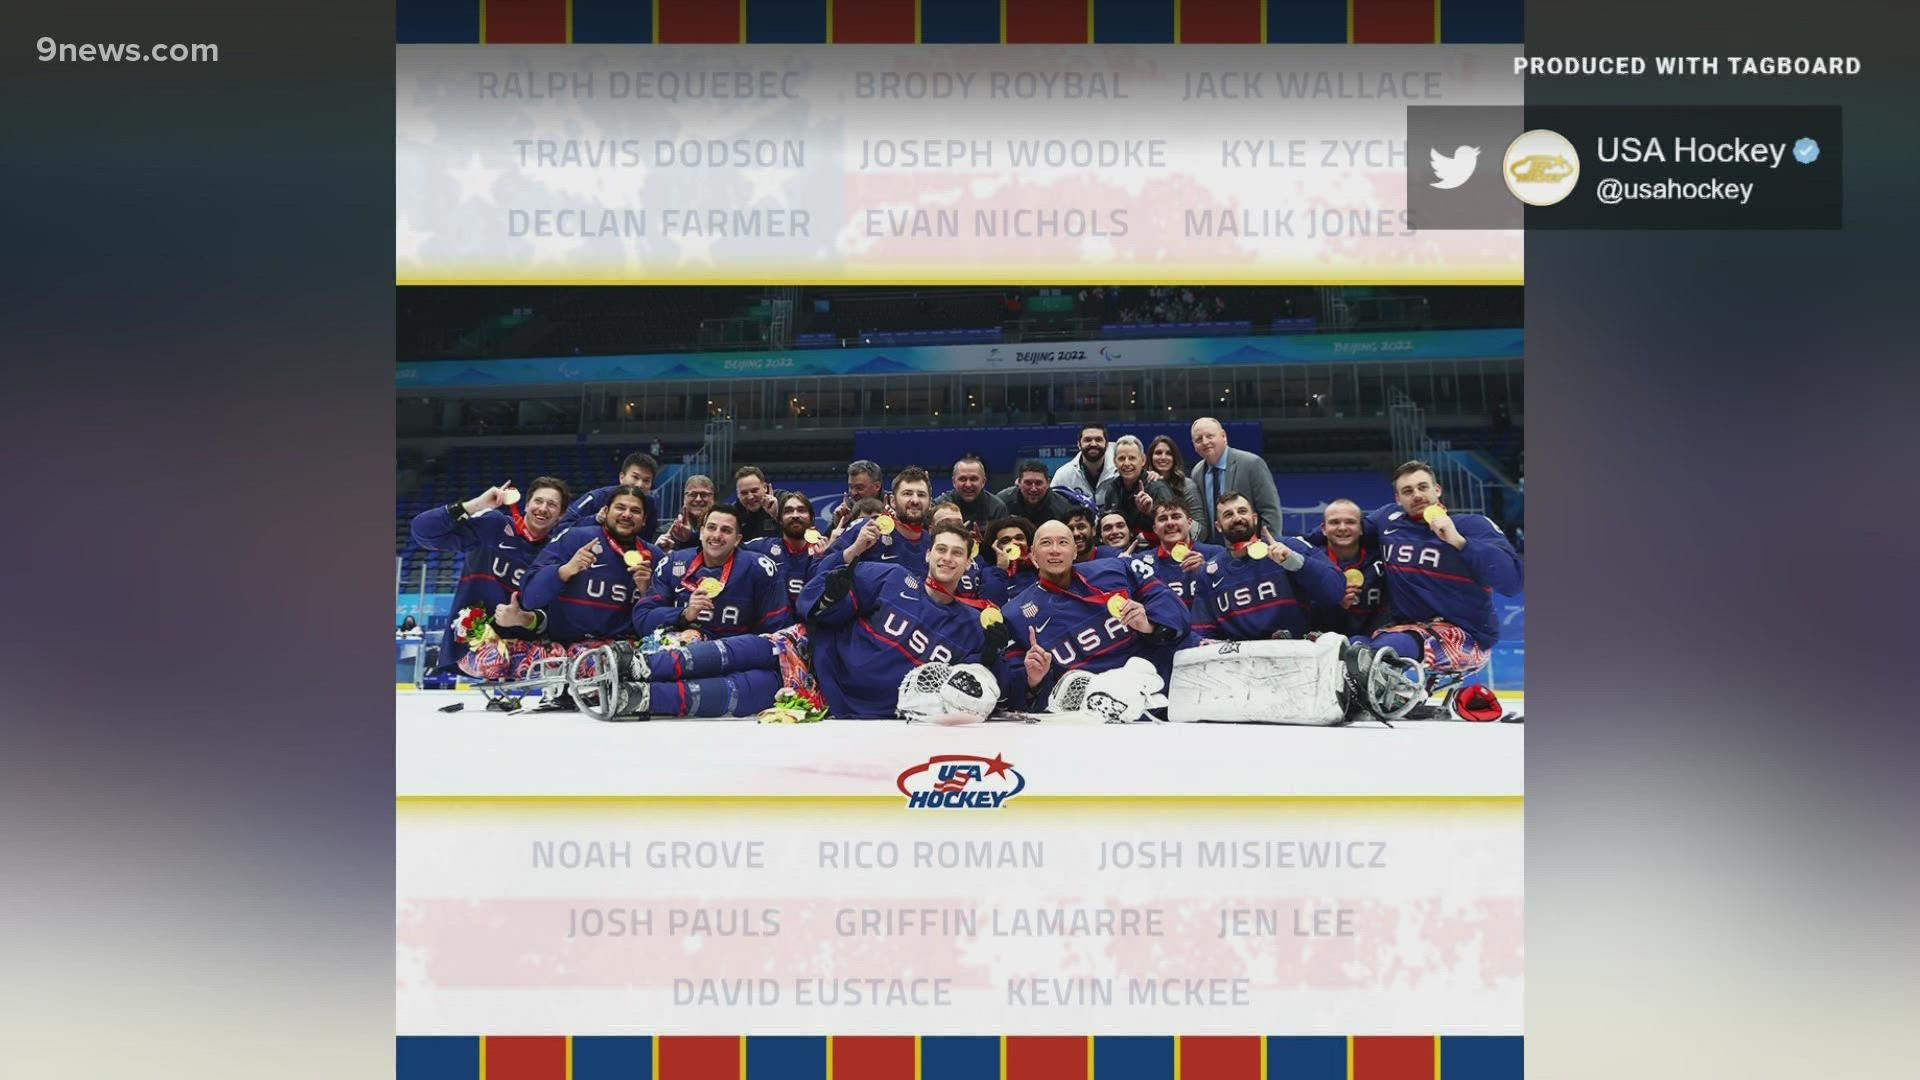 Team USA beat Canada in a 5-0 victory for a fourth consecutive Paralympic sled hockey gold medal on Sunday. Two athletes on the team are from Colorado.